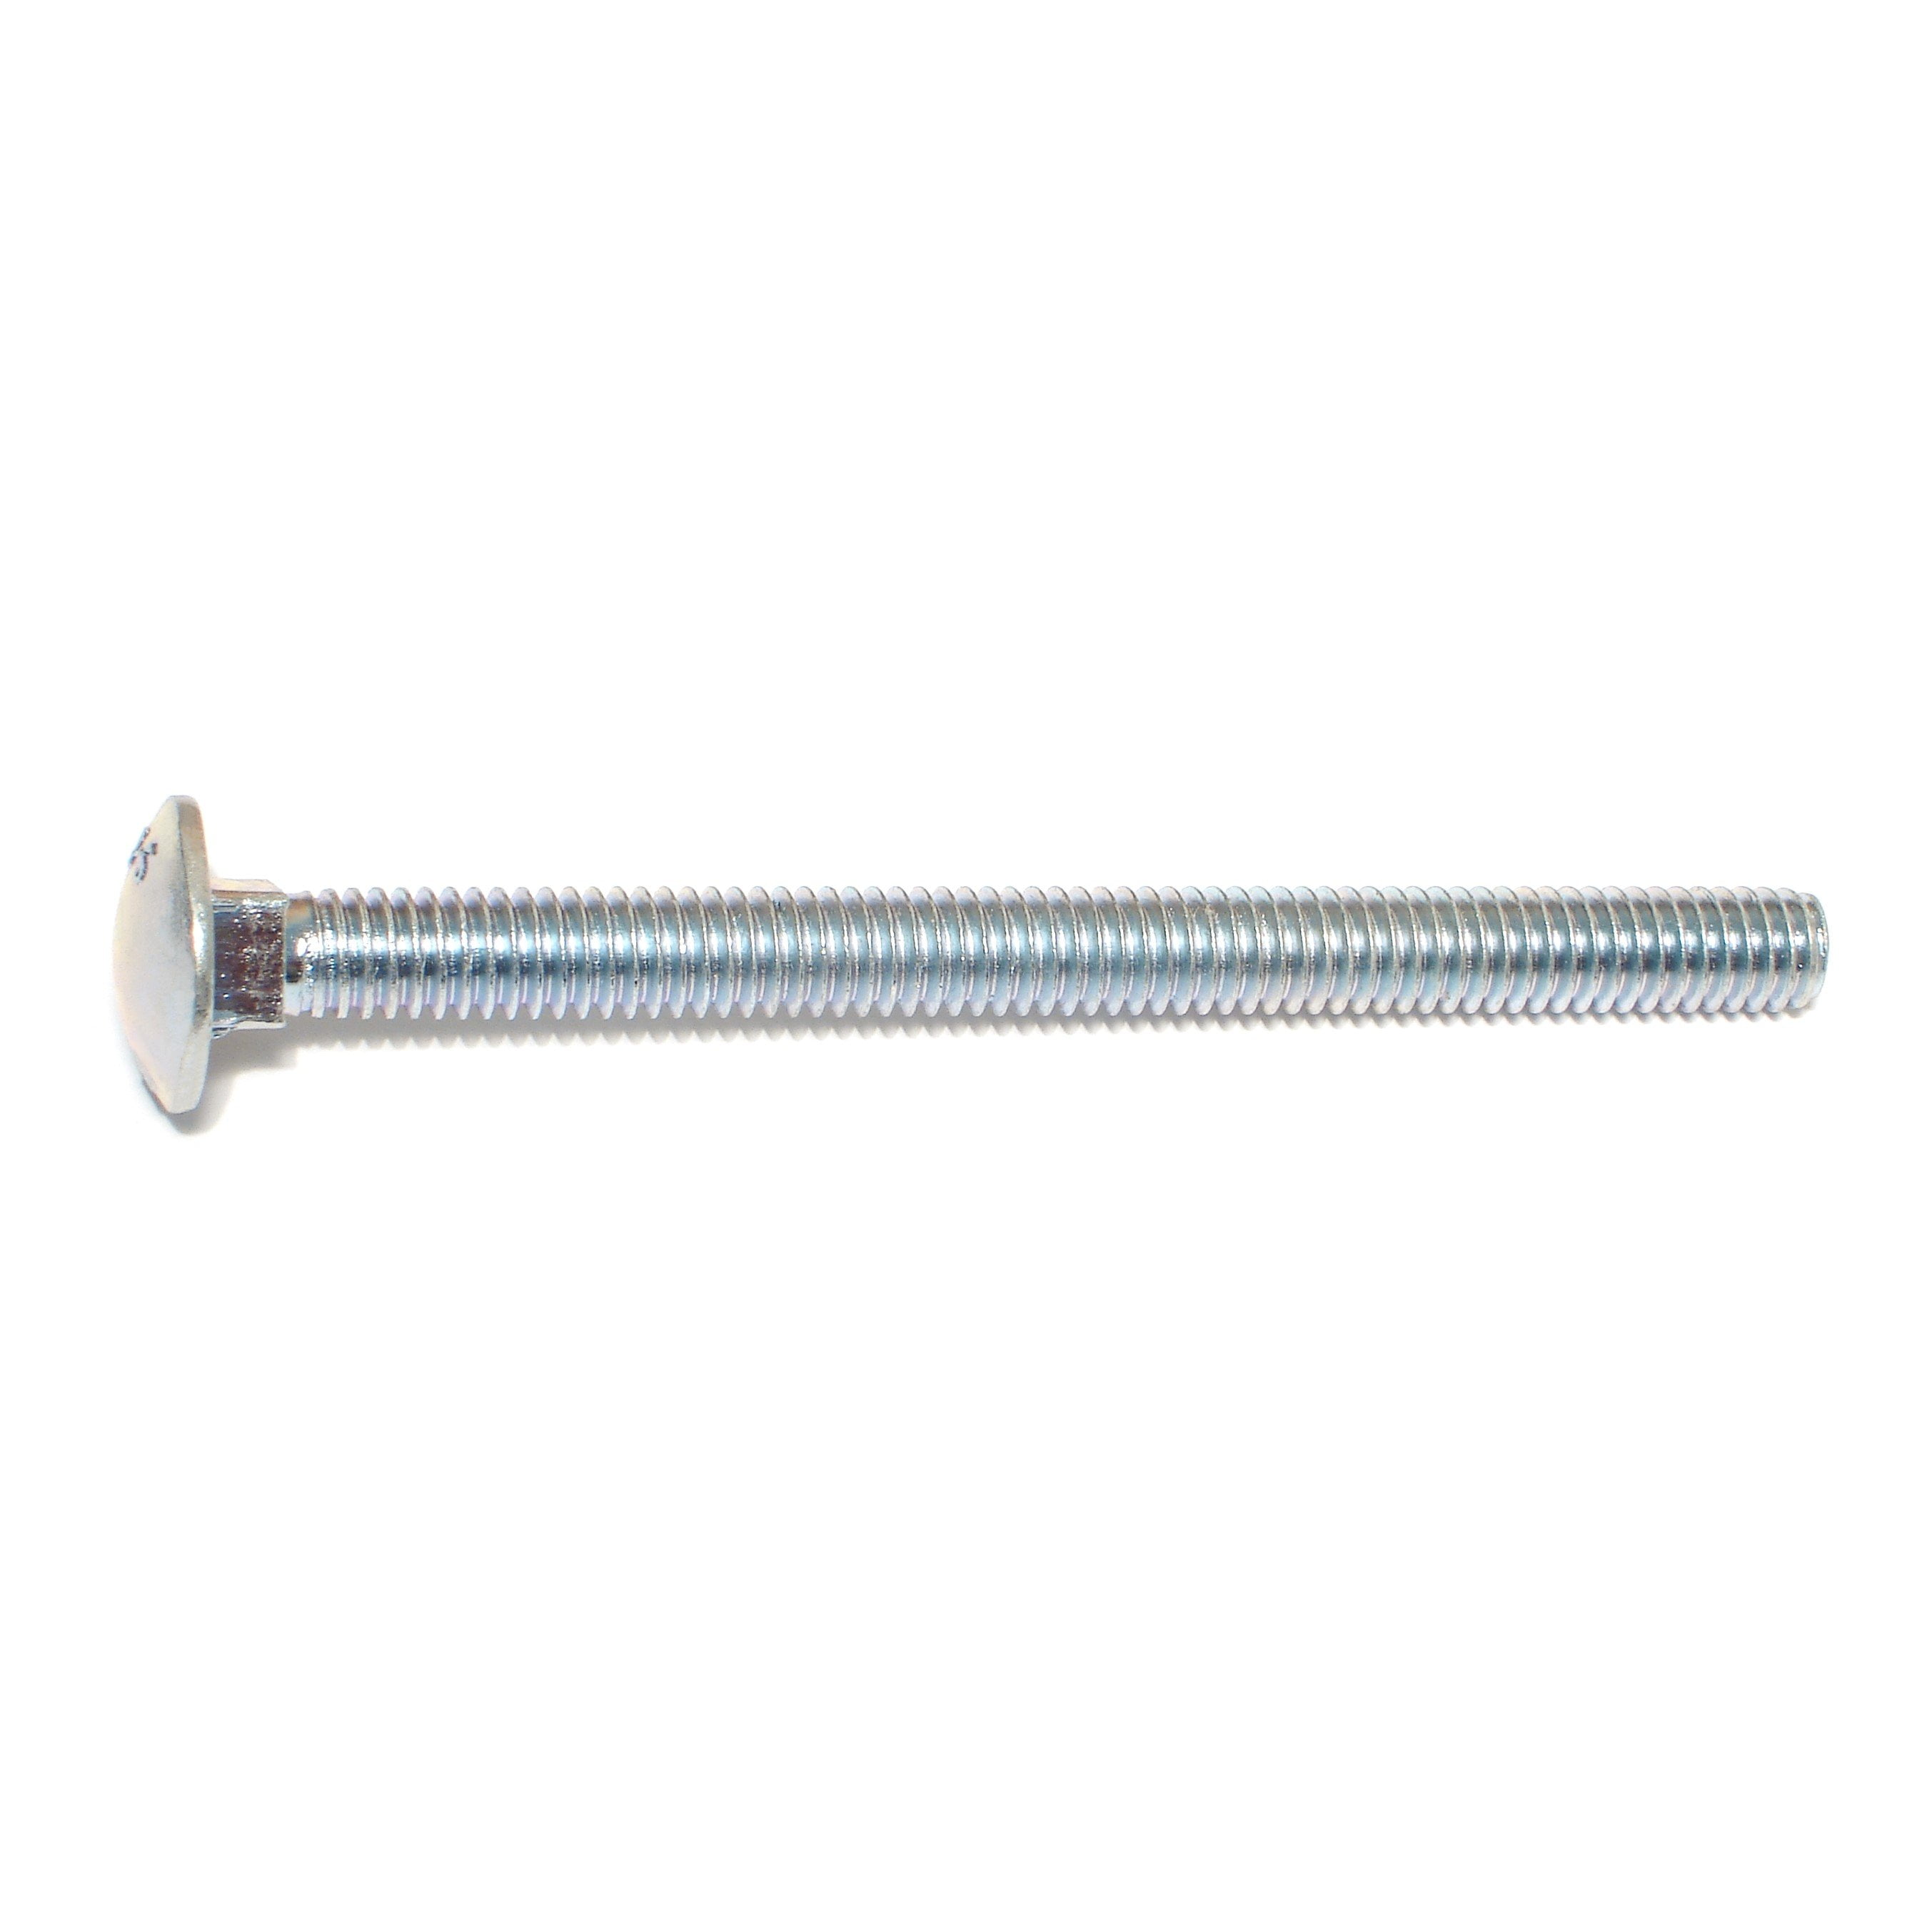 5/16-18 x 2" Stainless Steel Carriage Bolt 10 pcs